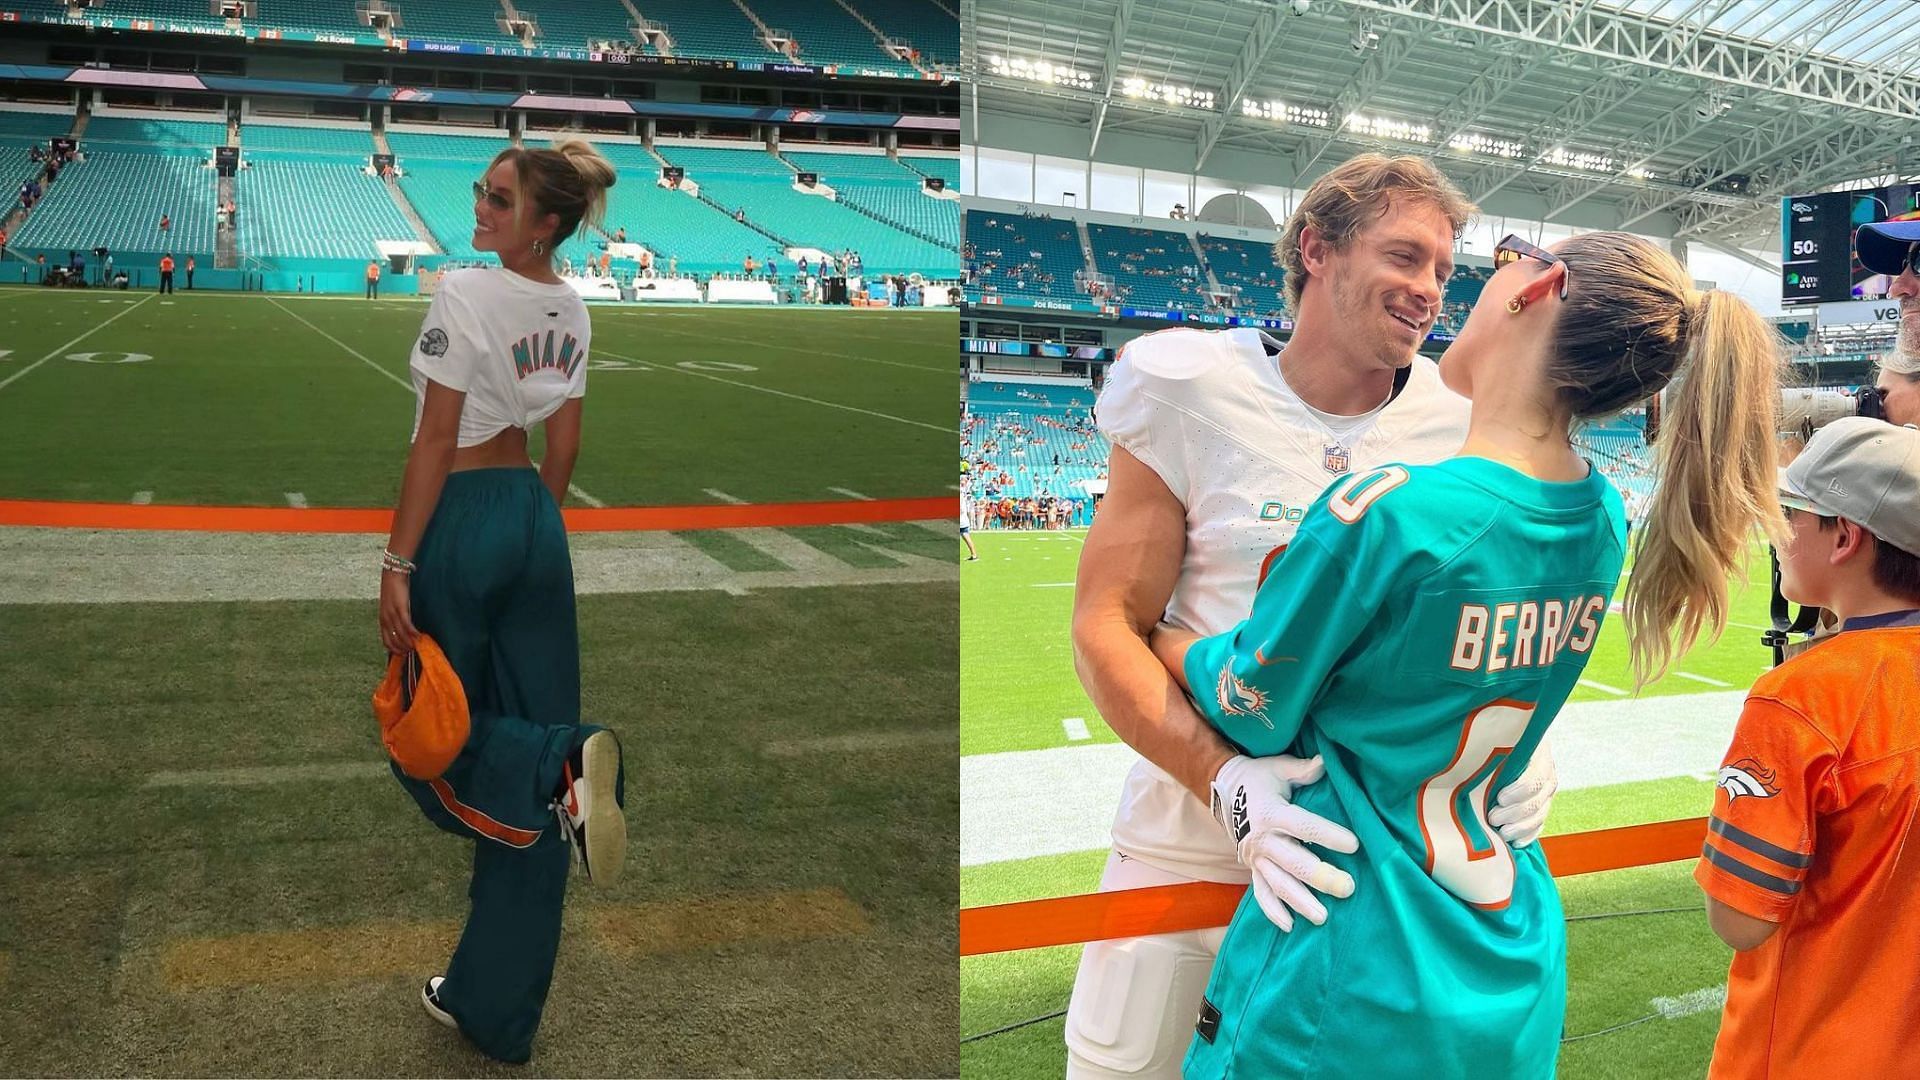 Alix Earle and Braxton Berrios feature on a TikTok video together.